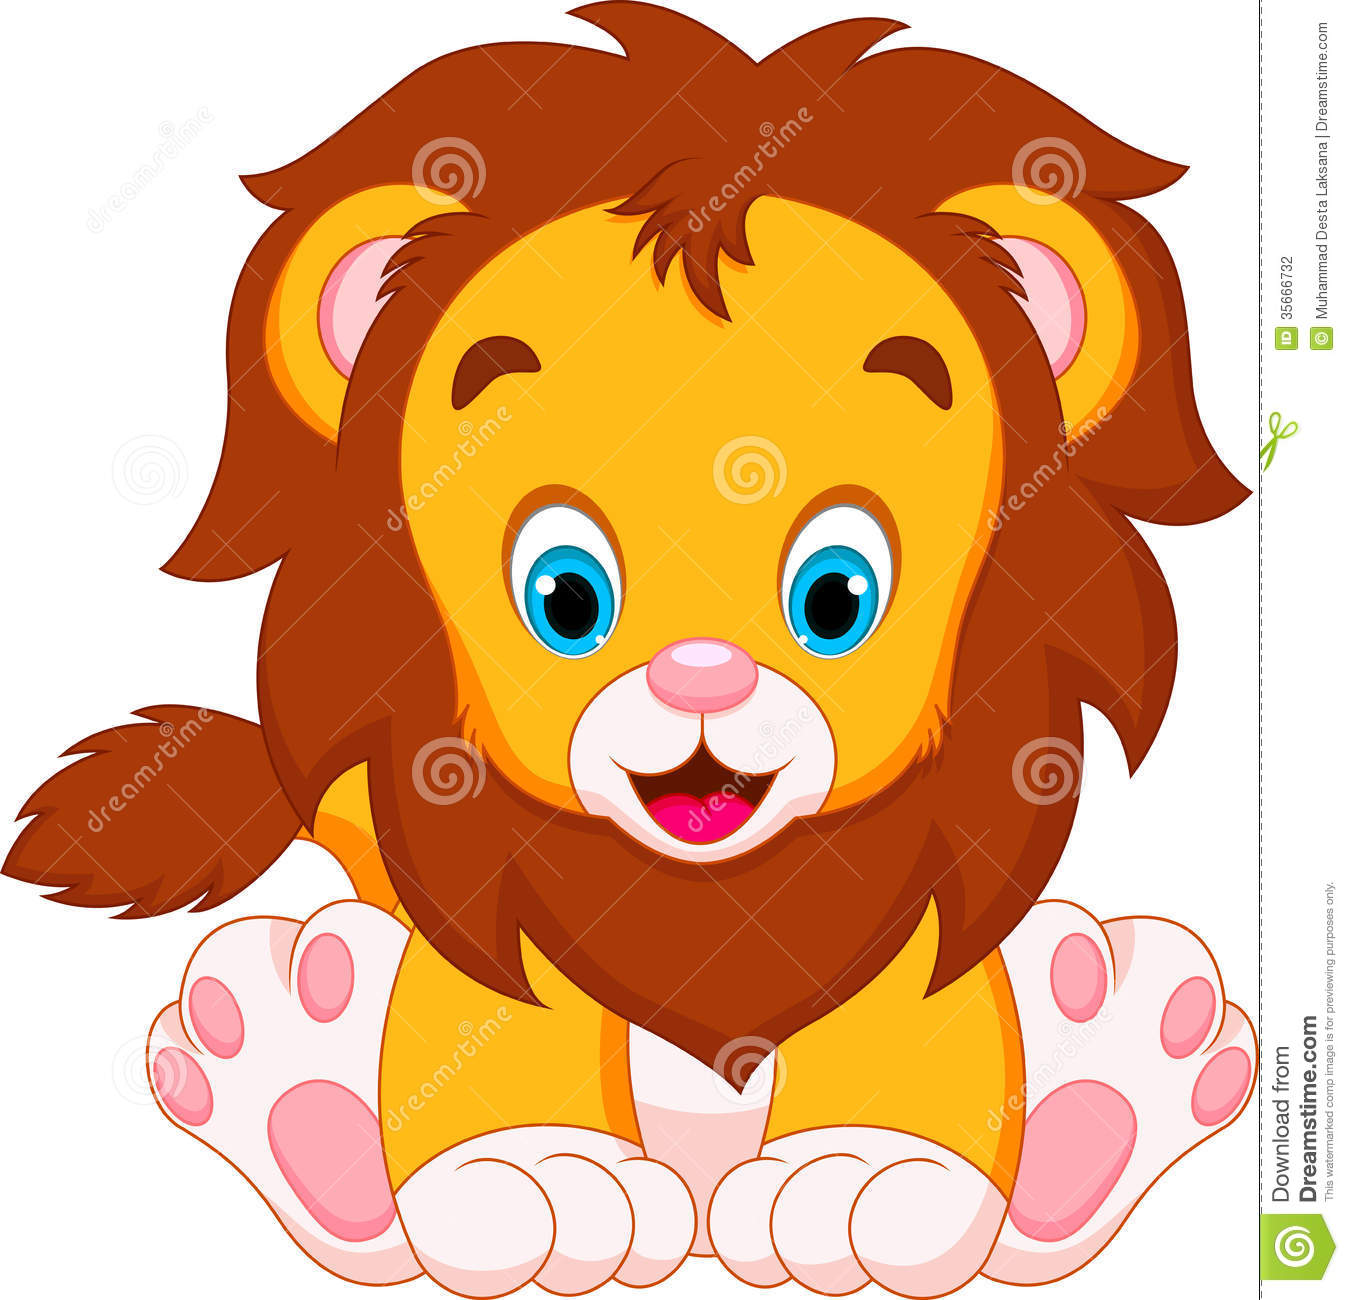 Lion clipart cute. Free pics of lions